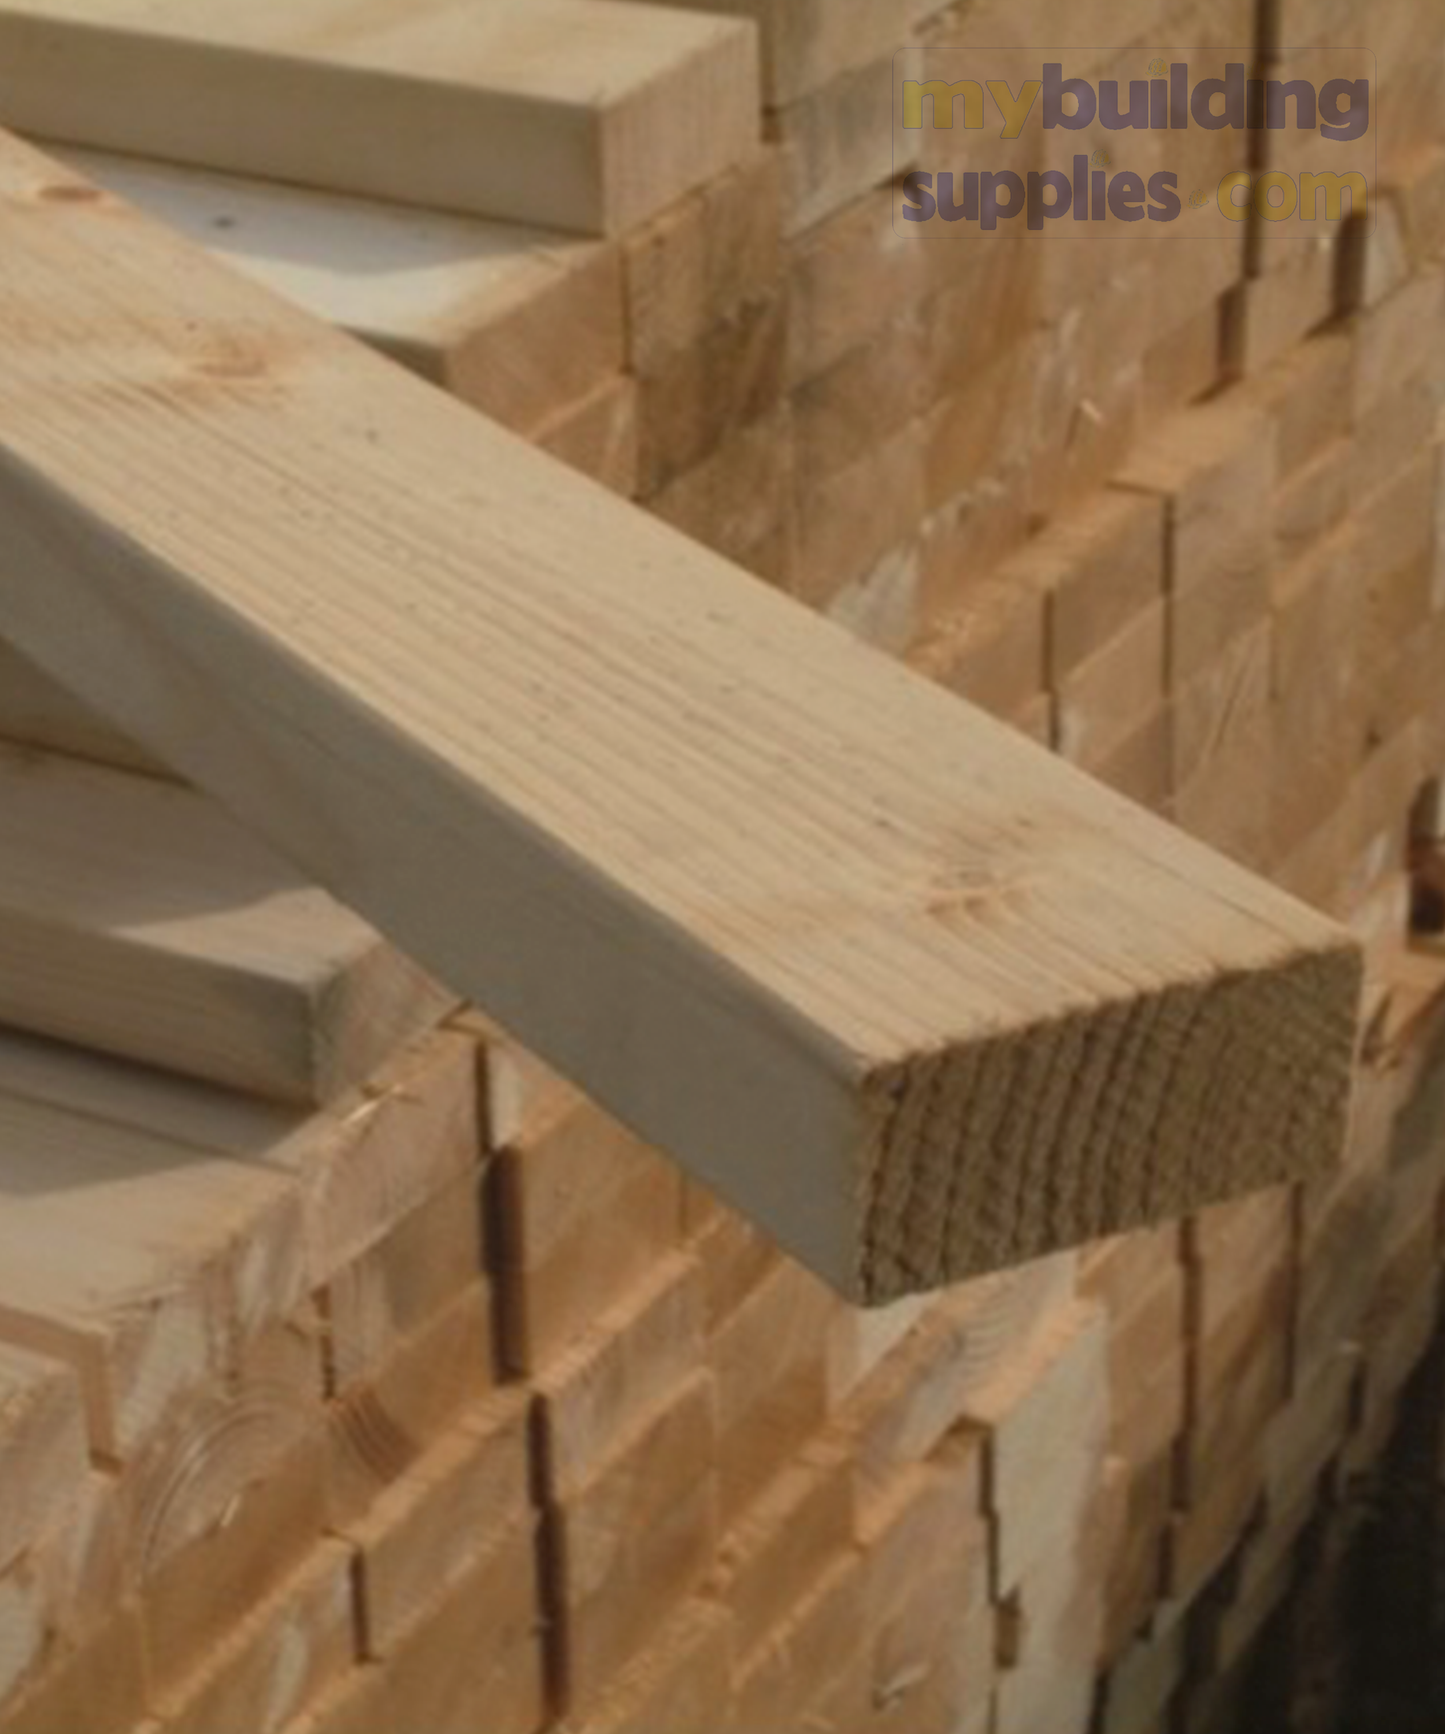 4" x 2"  100mm (W) x 50mm (H) C16 Treated Timber